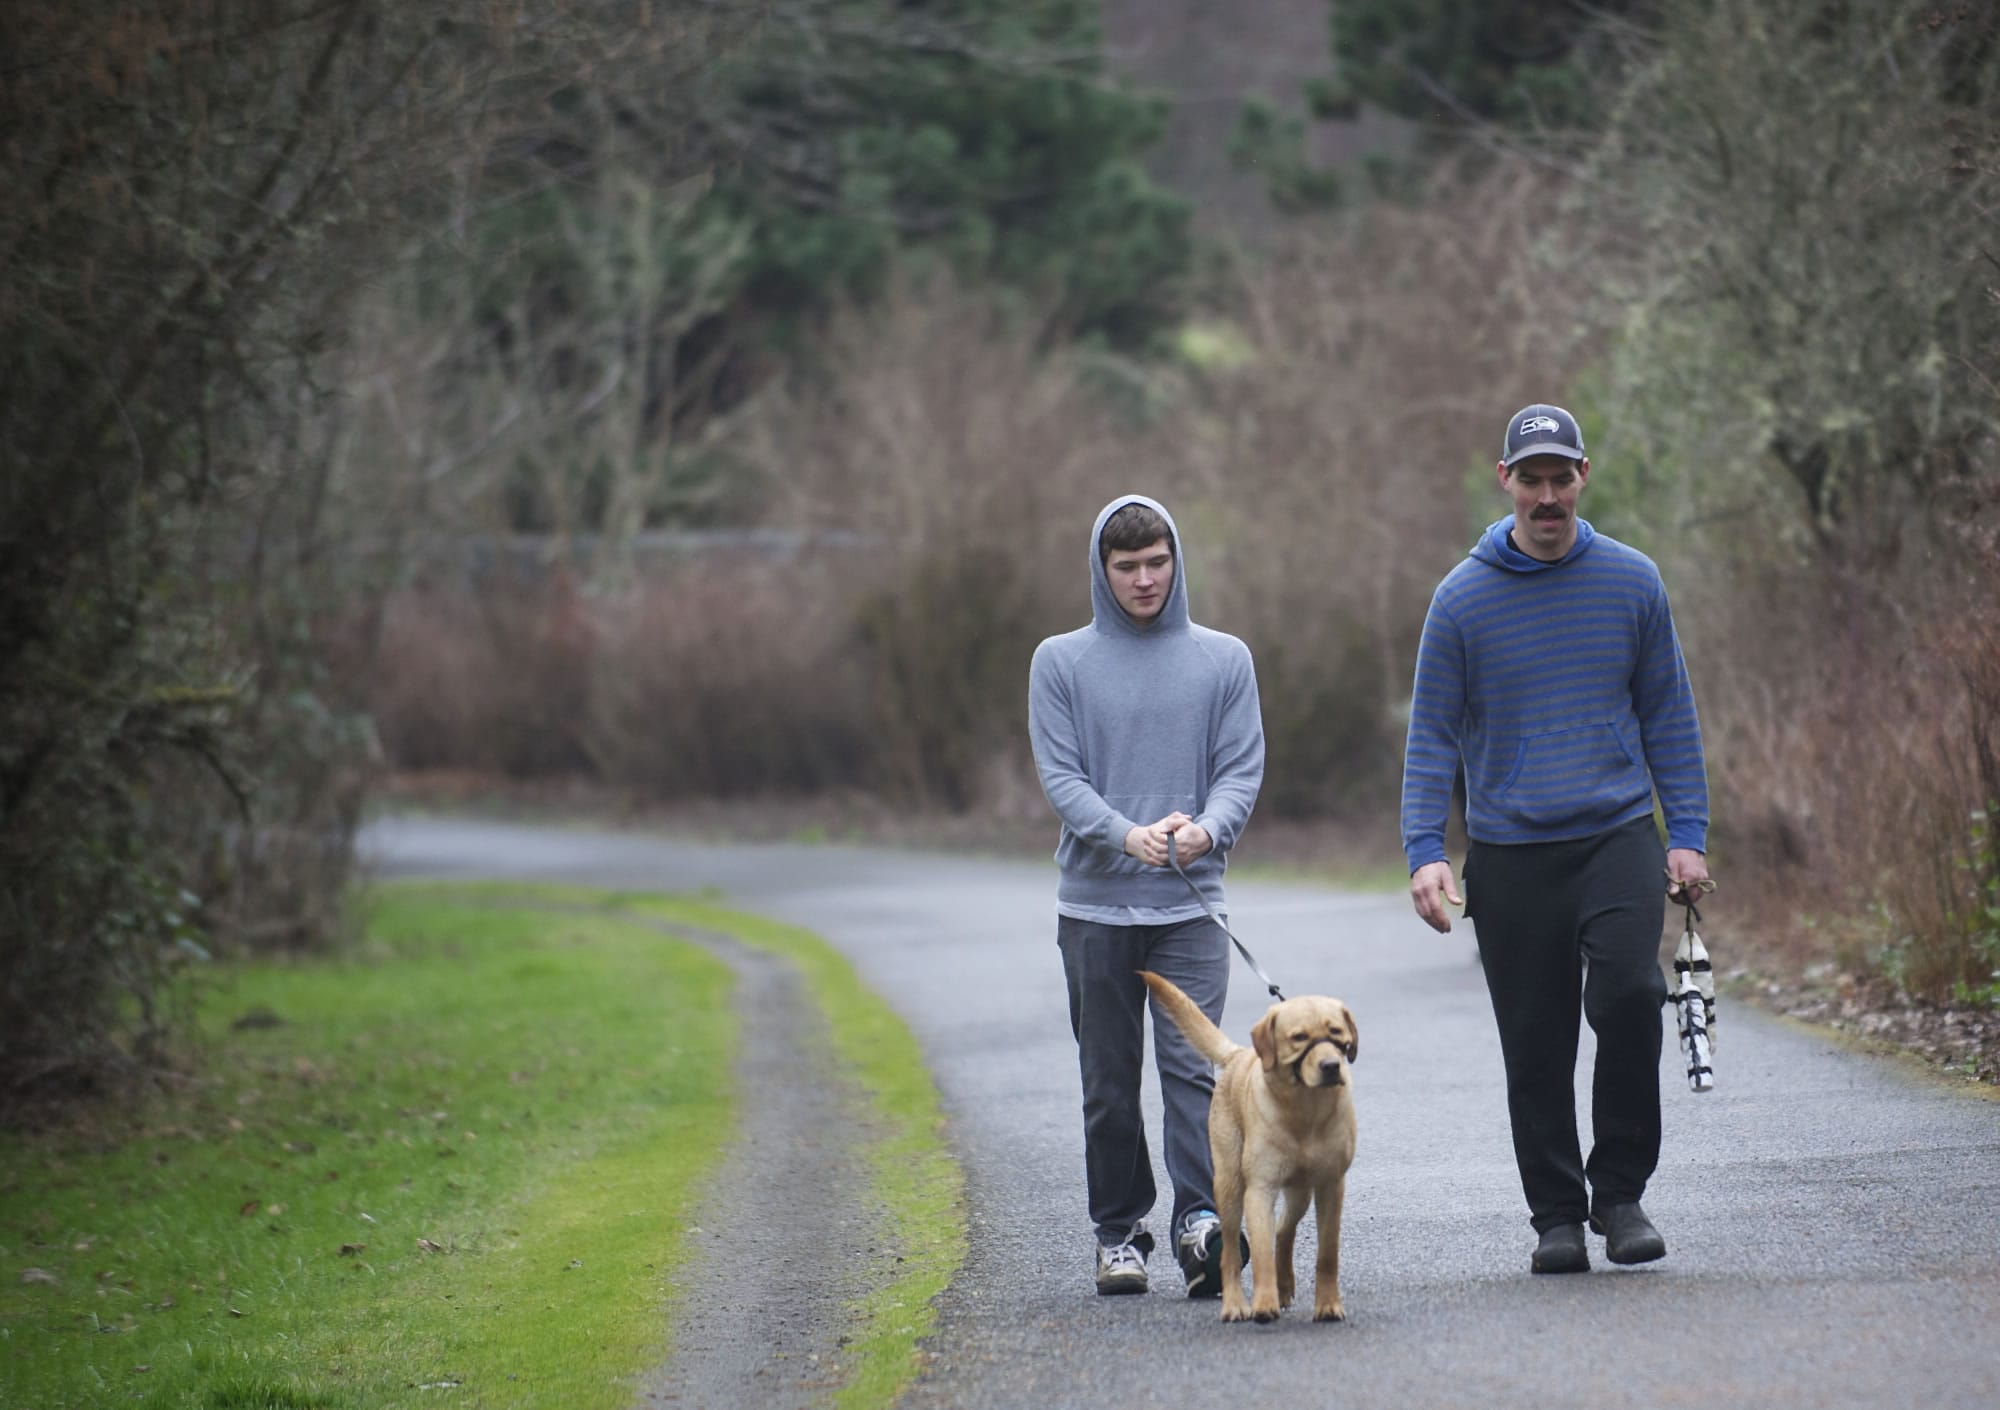 It was a bird-dog training day for Aaron Shinn, right, his son Buck, 16, and Charlie, their 11-month-old yellow lab.